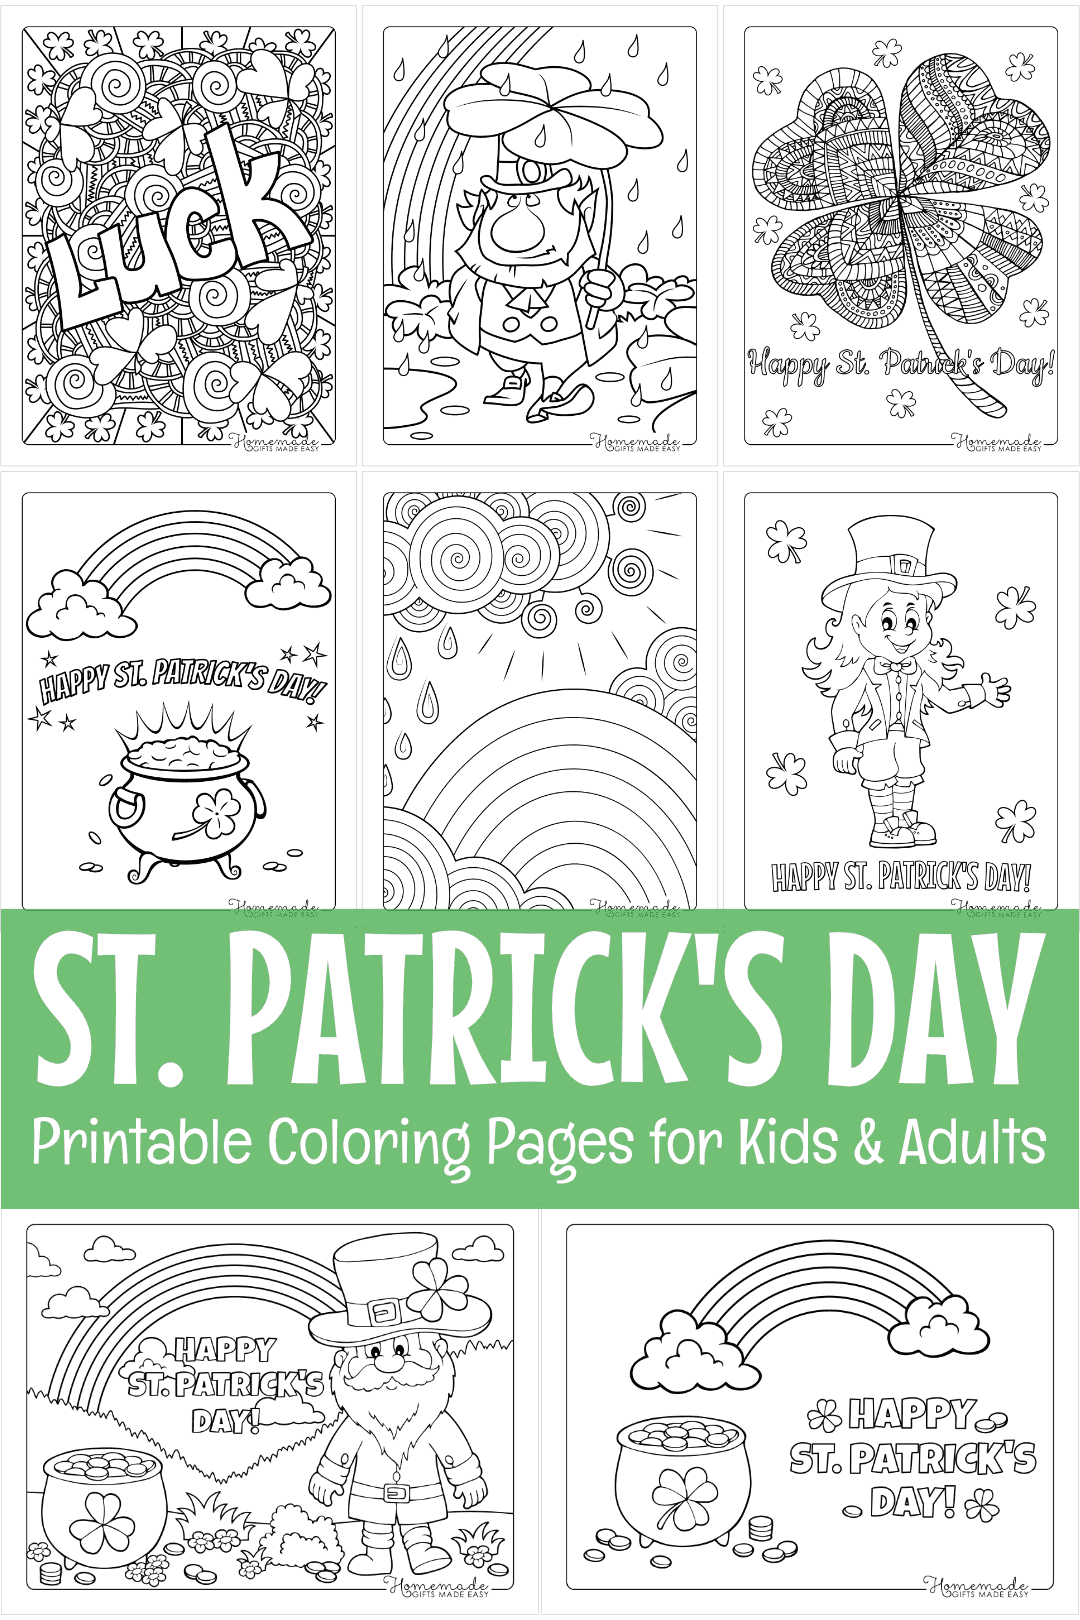 20 St. Patrick's Day Coloring Pages   Free Printable PDFs